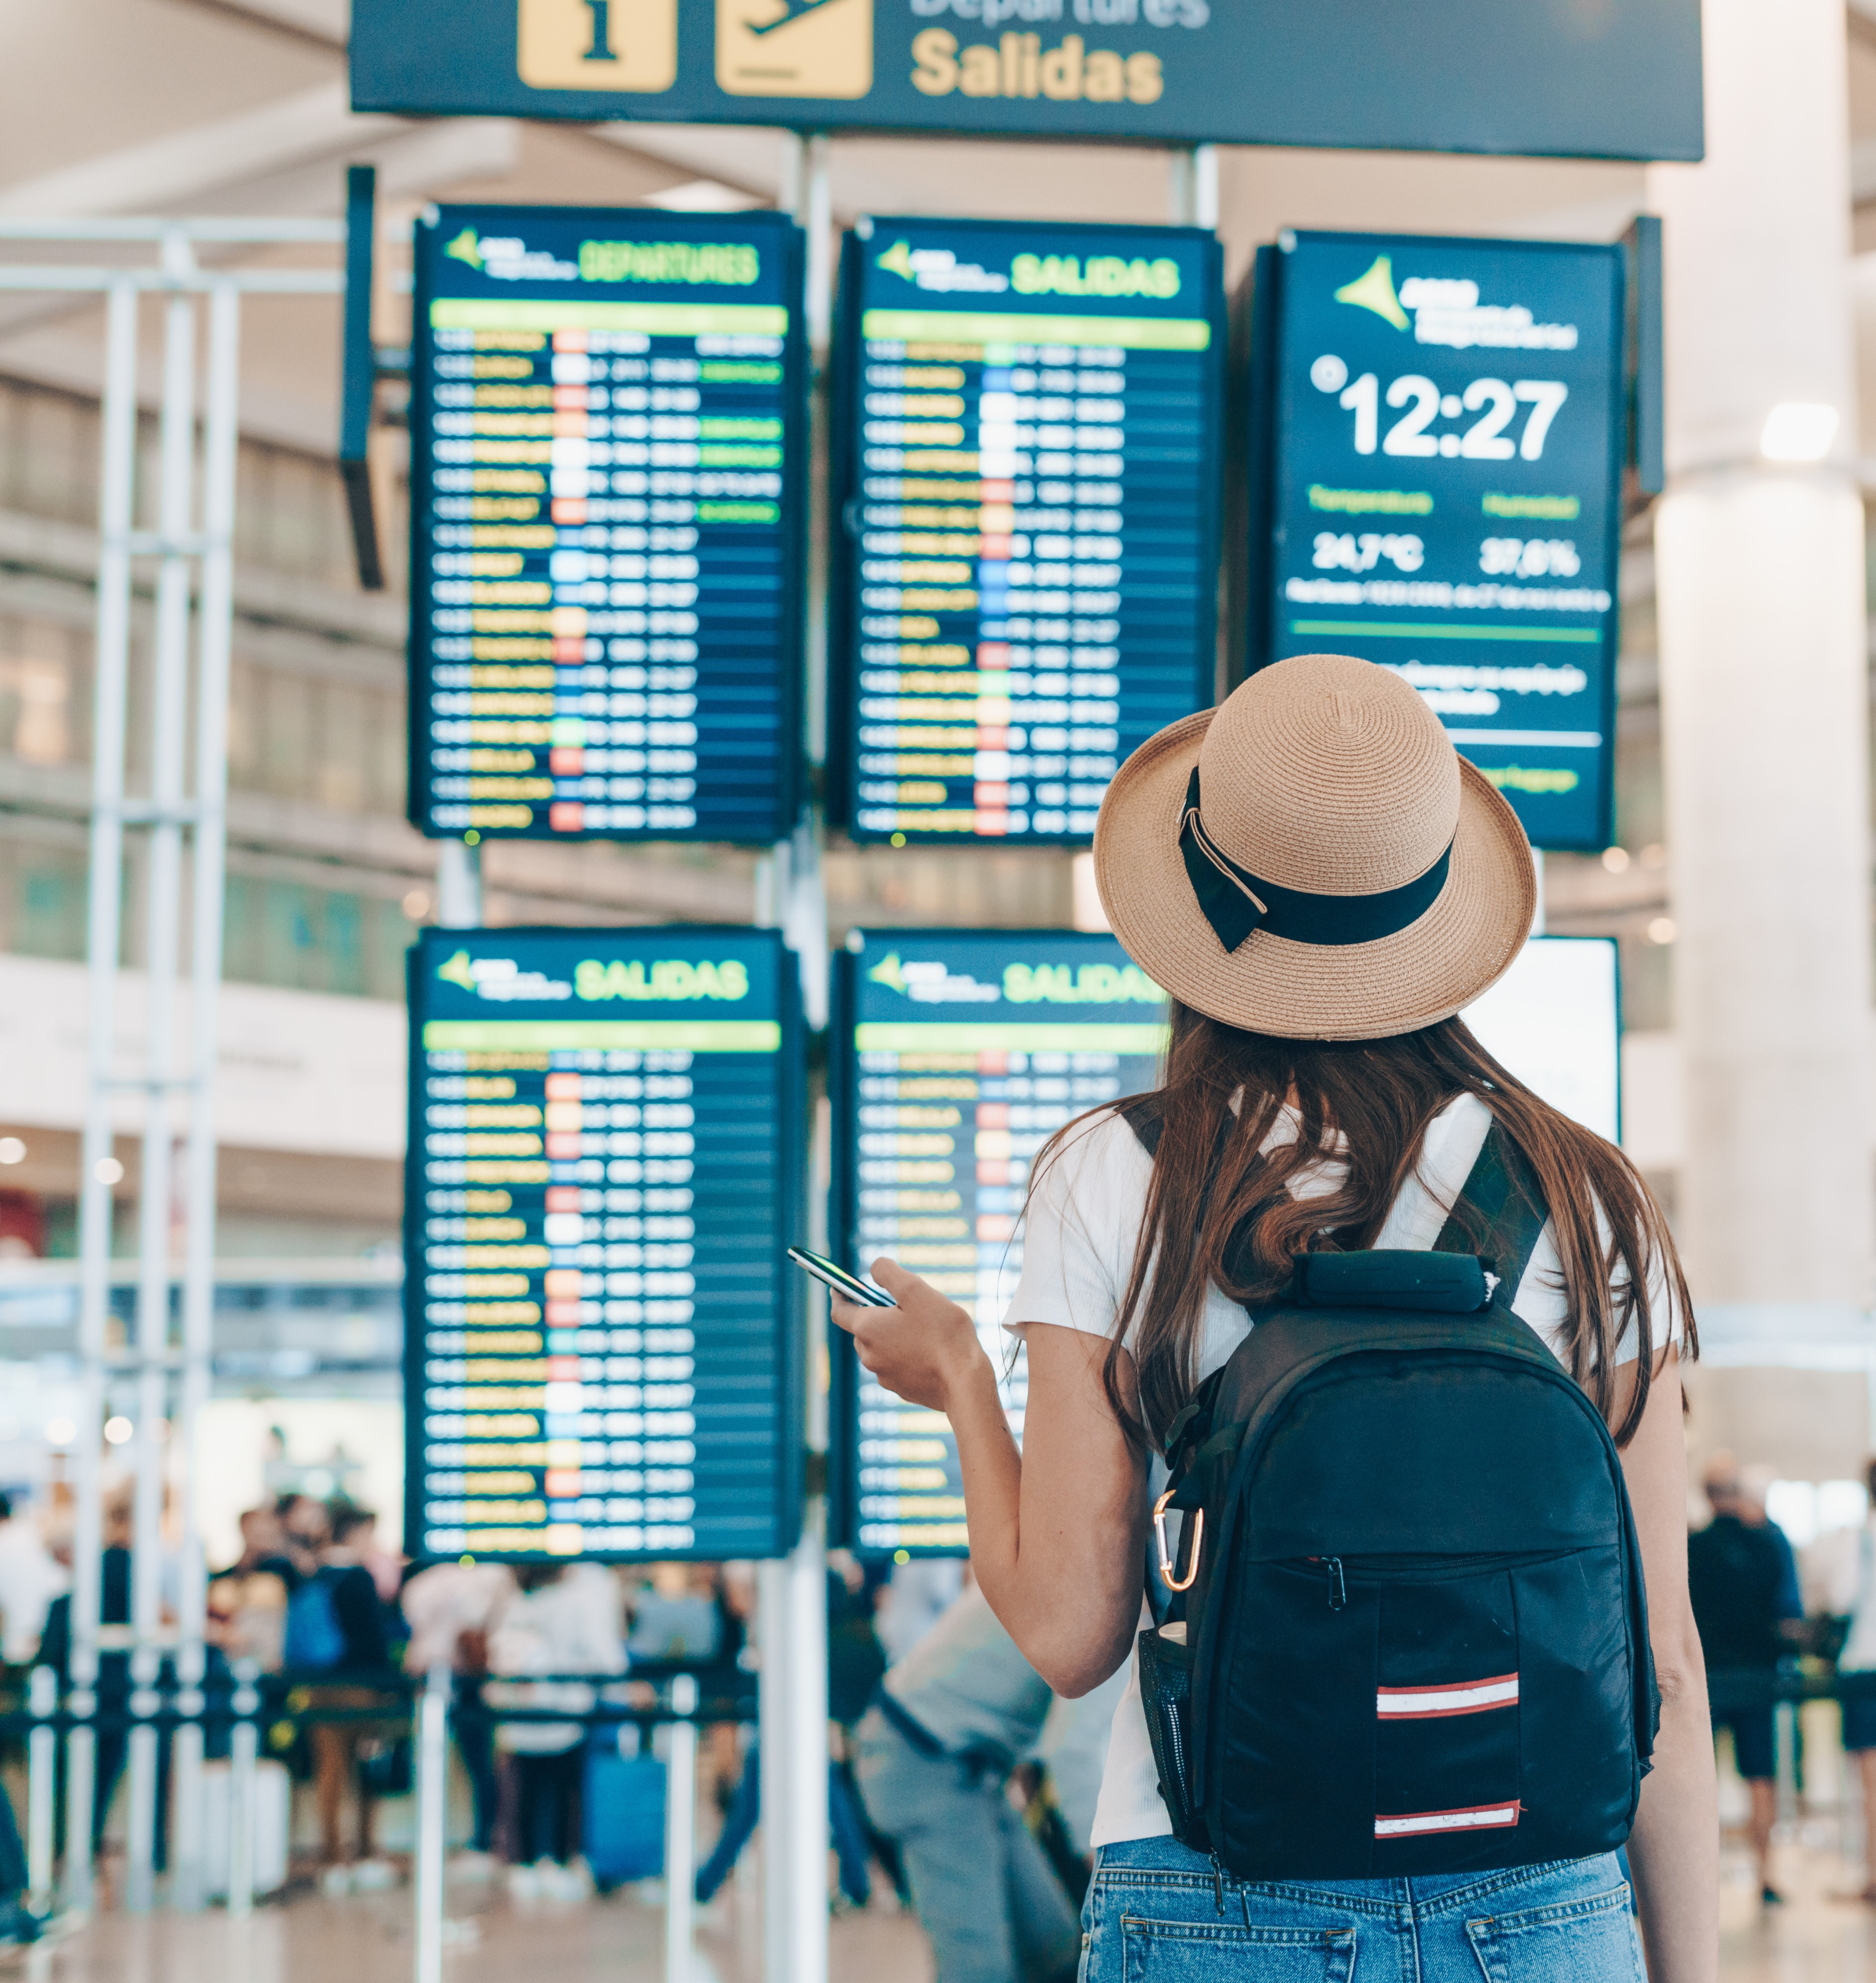 A woman wearing a brown hat and a backpack stands in front of the departure screen in an airport.